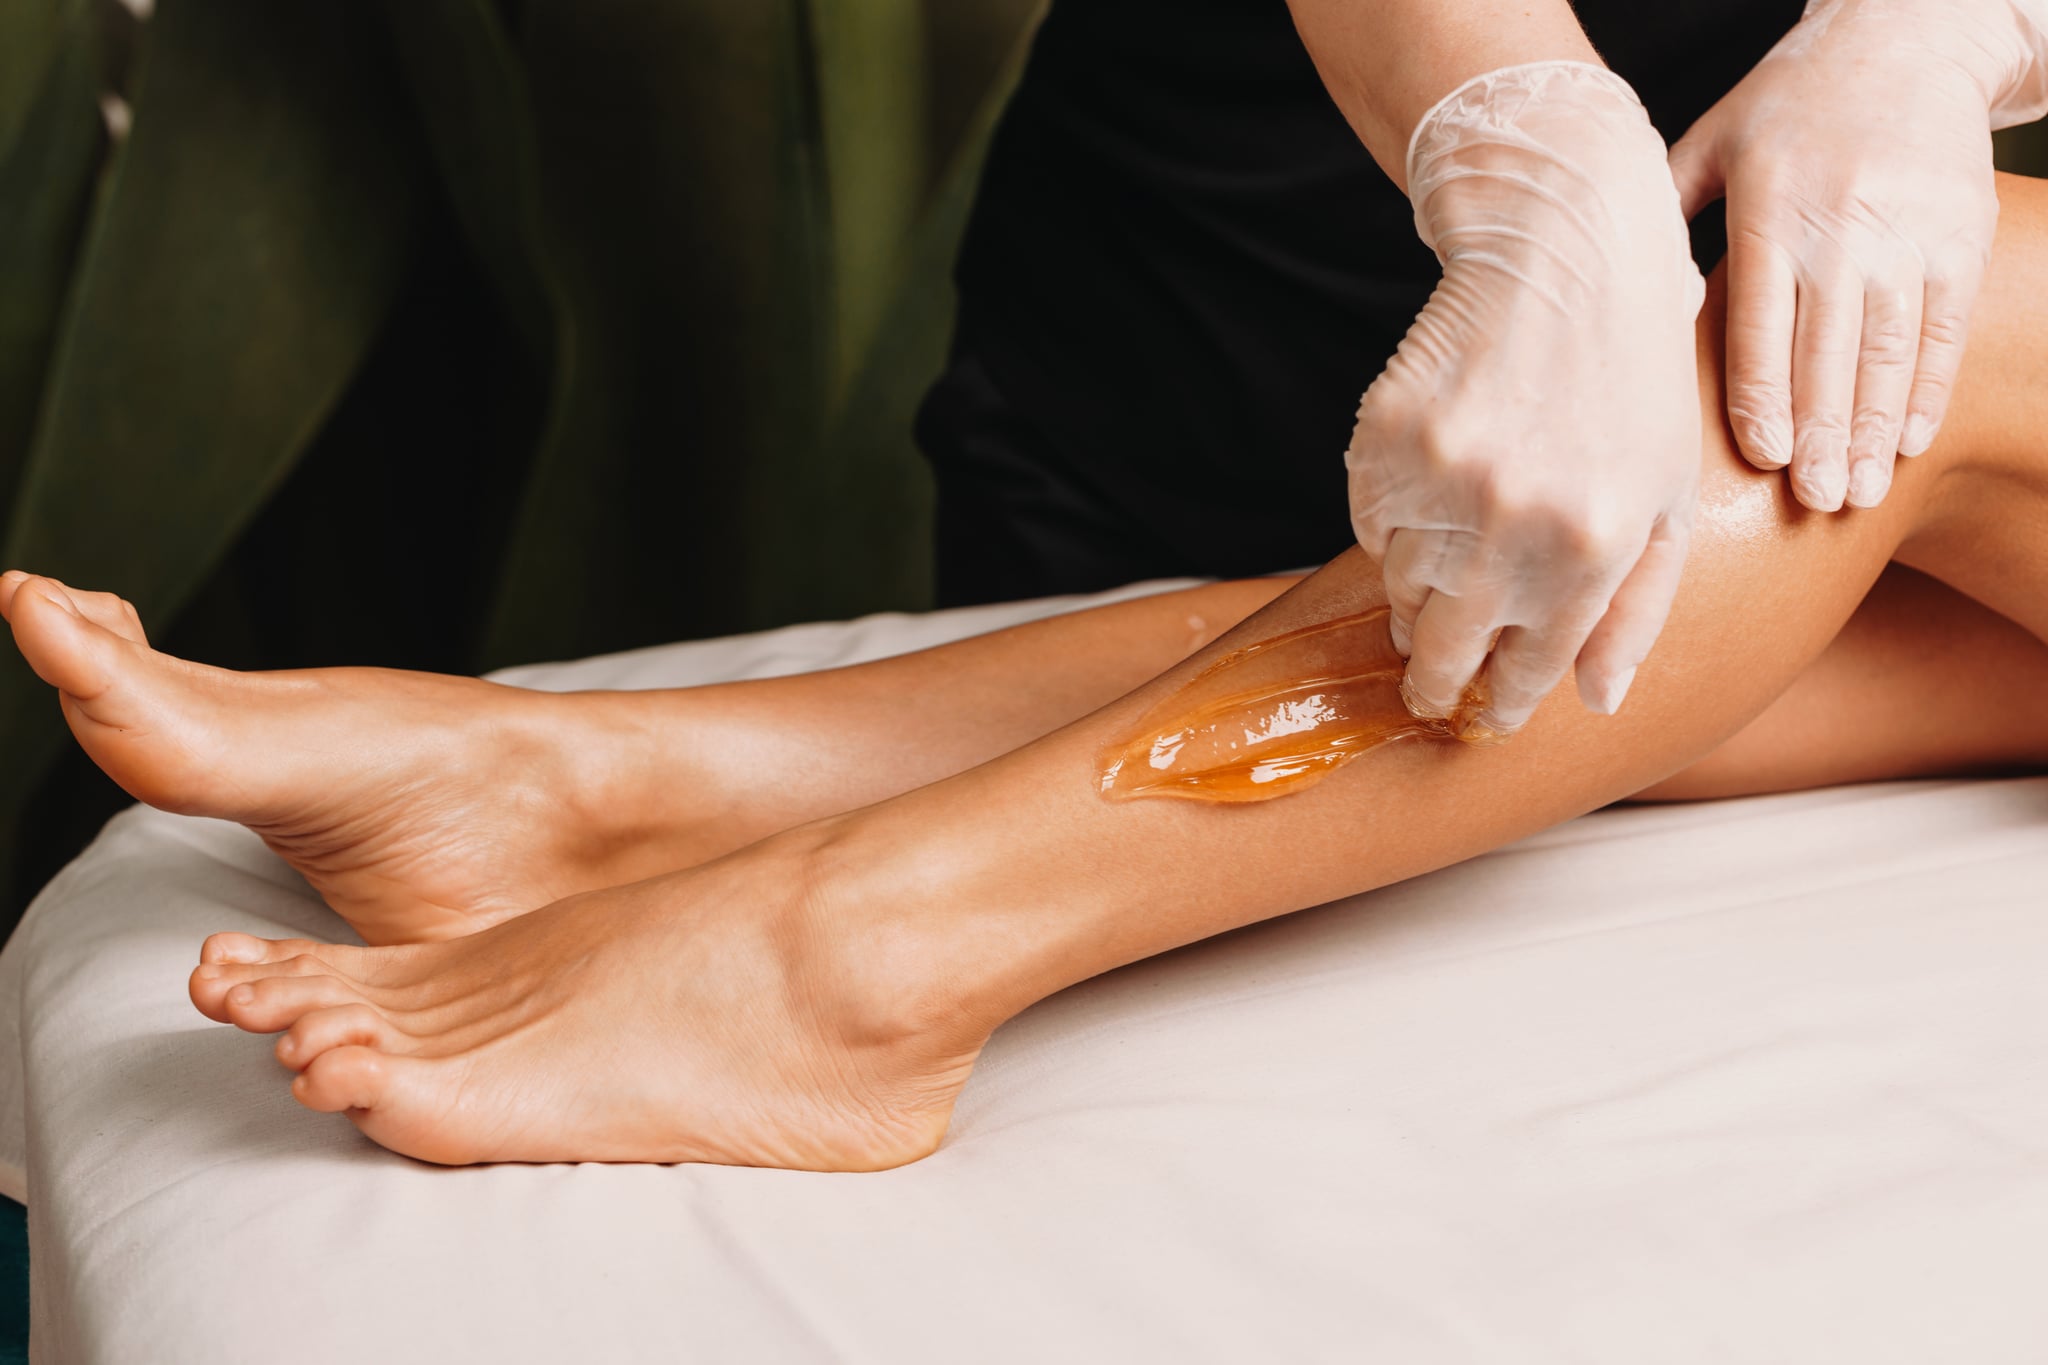 Close up photo of a sugaring procedure done at the salon during a leg skin protection session